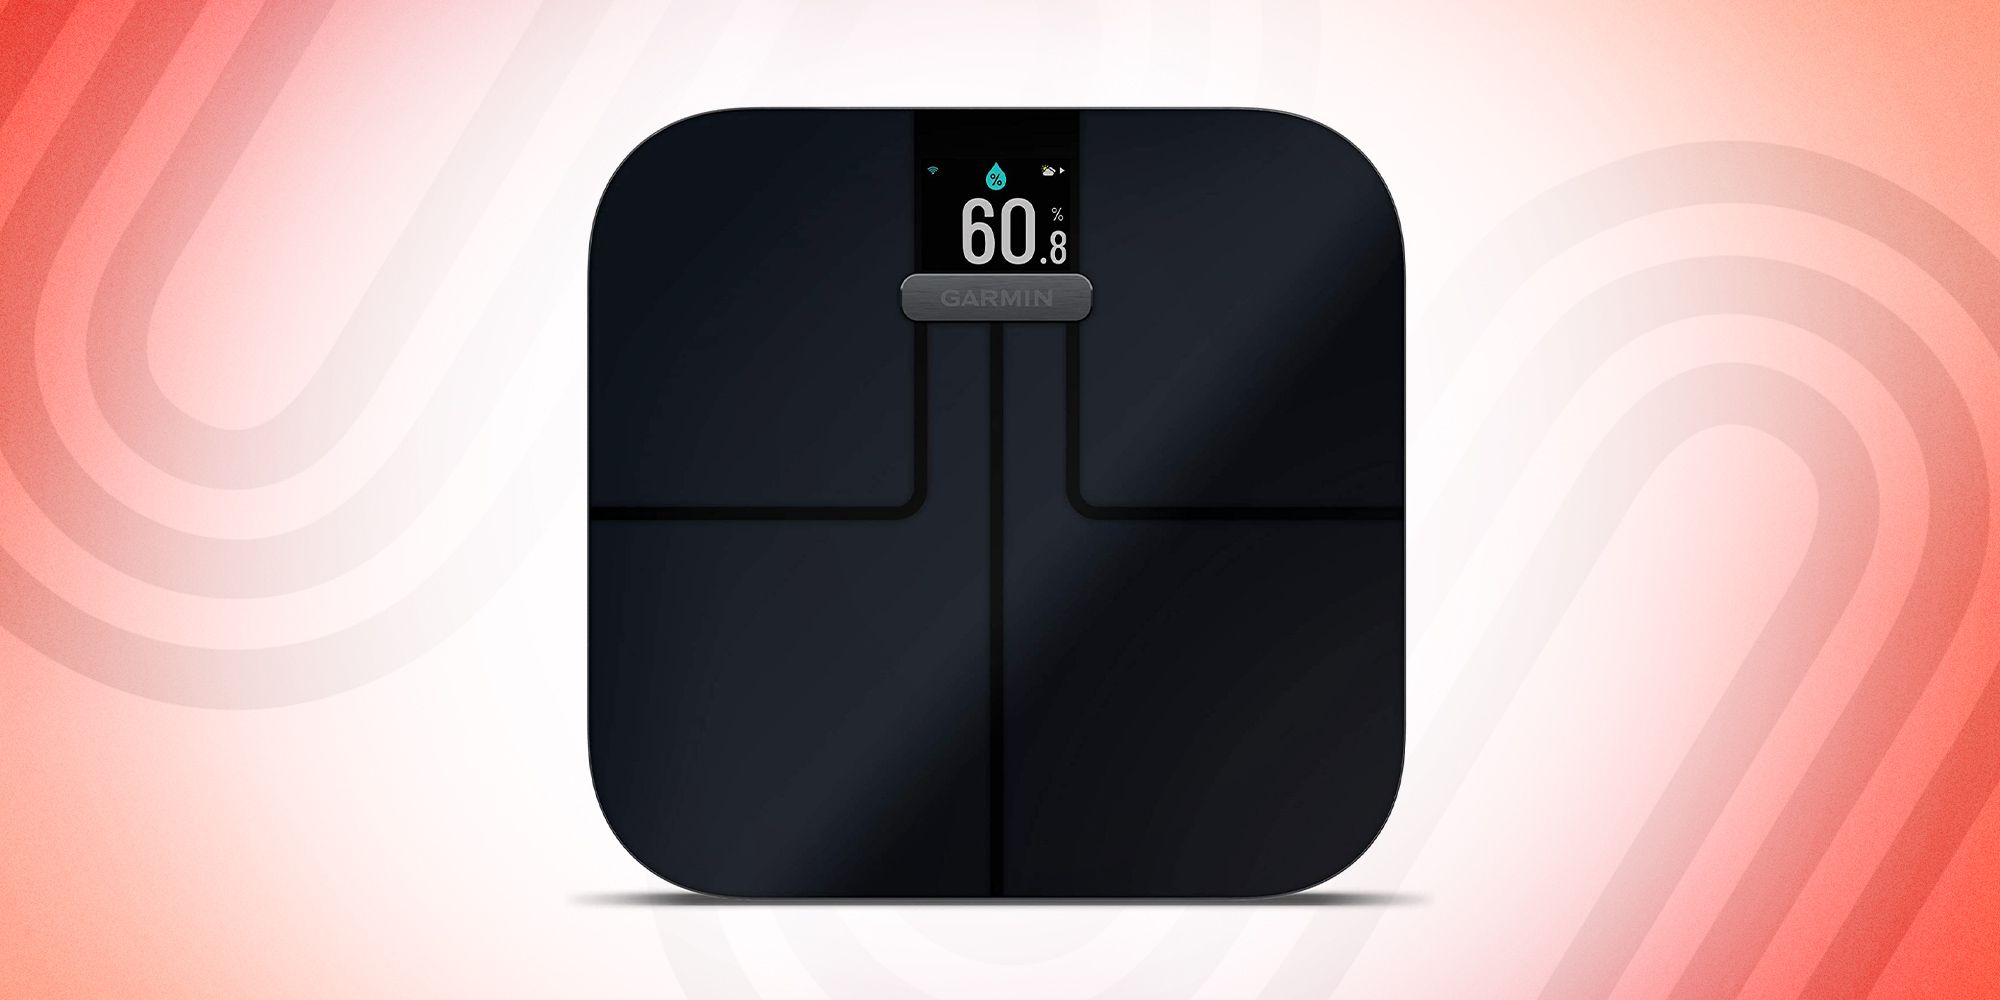 The 8 best smart scales to buy now, per experts